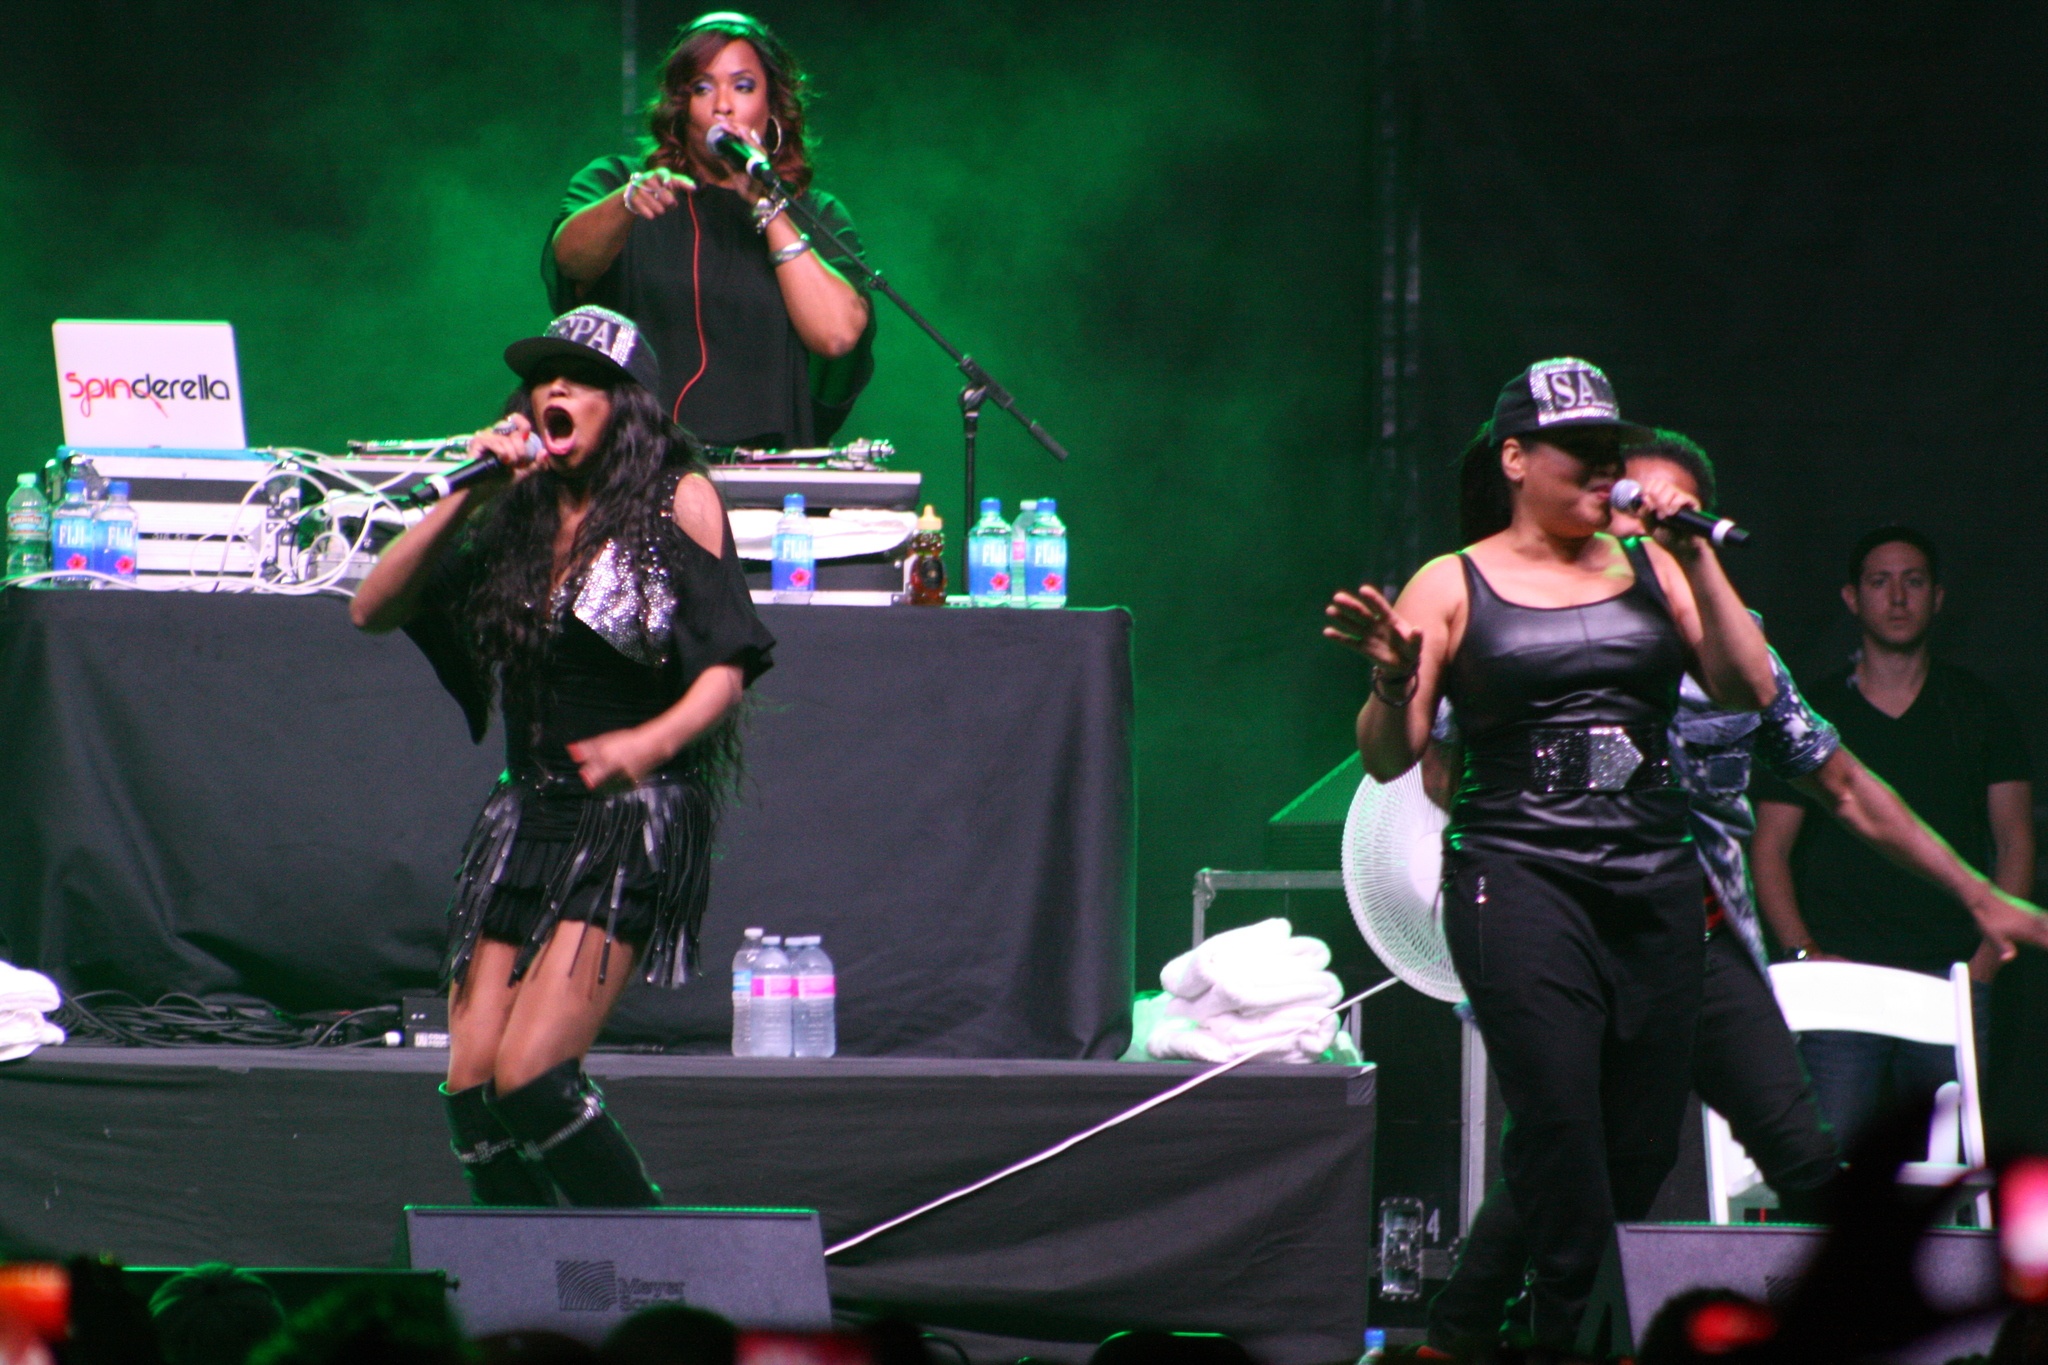 Hip-hop trio Salt N Pepa performed on Saturday at the “I Love the 90s” concert at Marymoor Park in King County near Redmond.